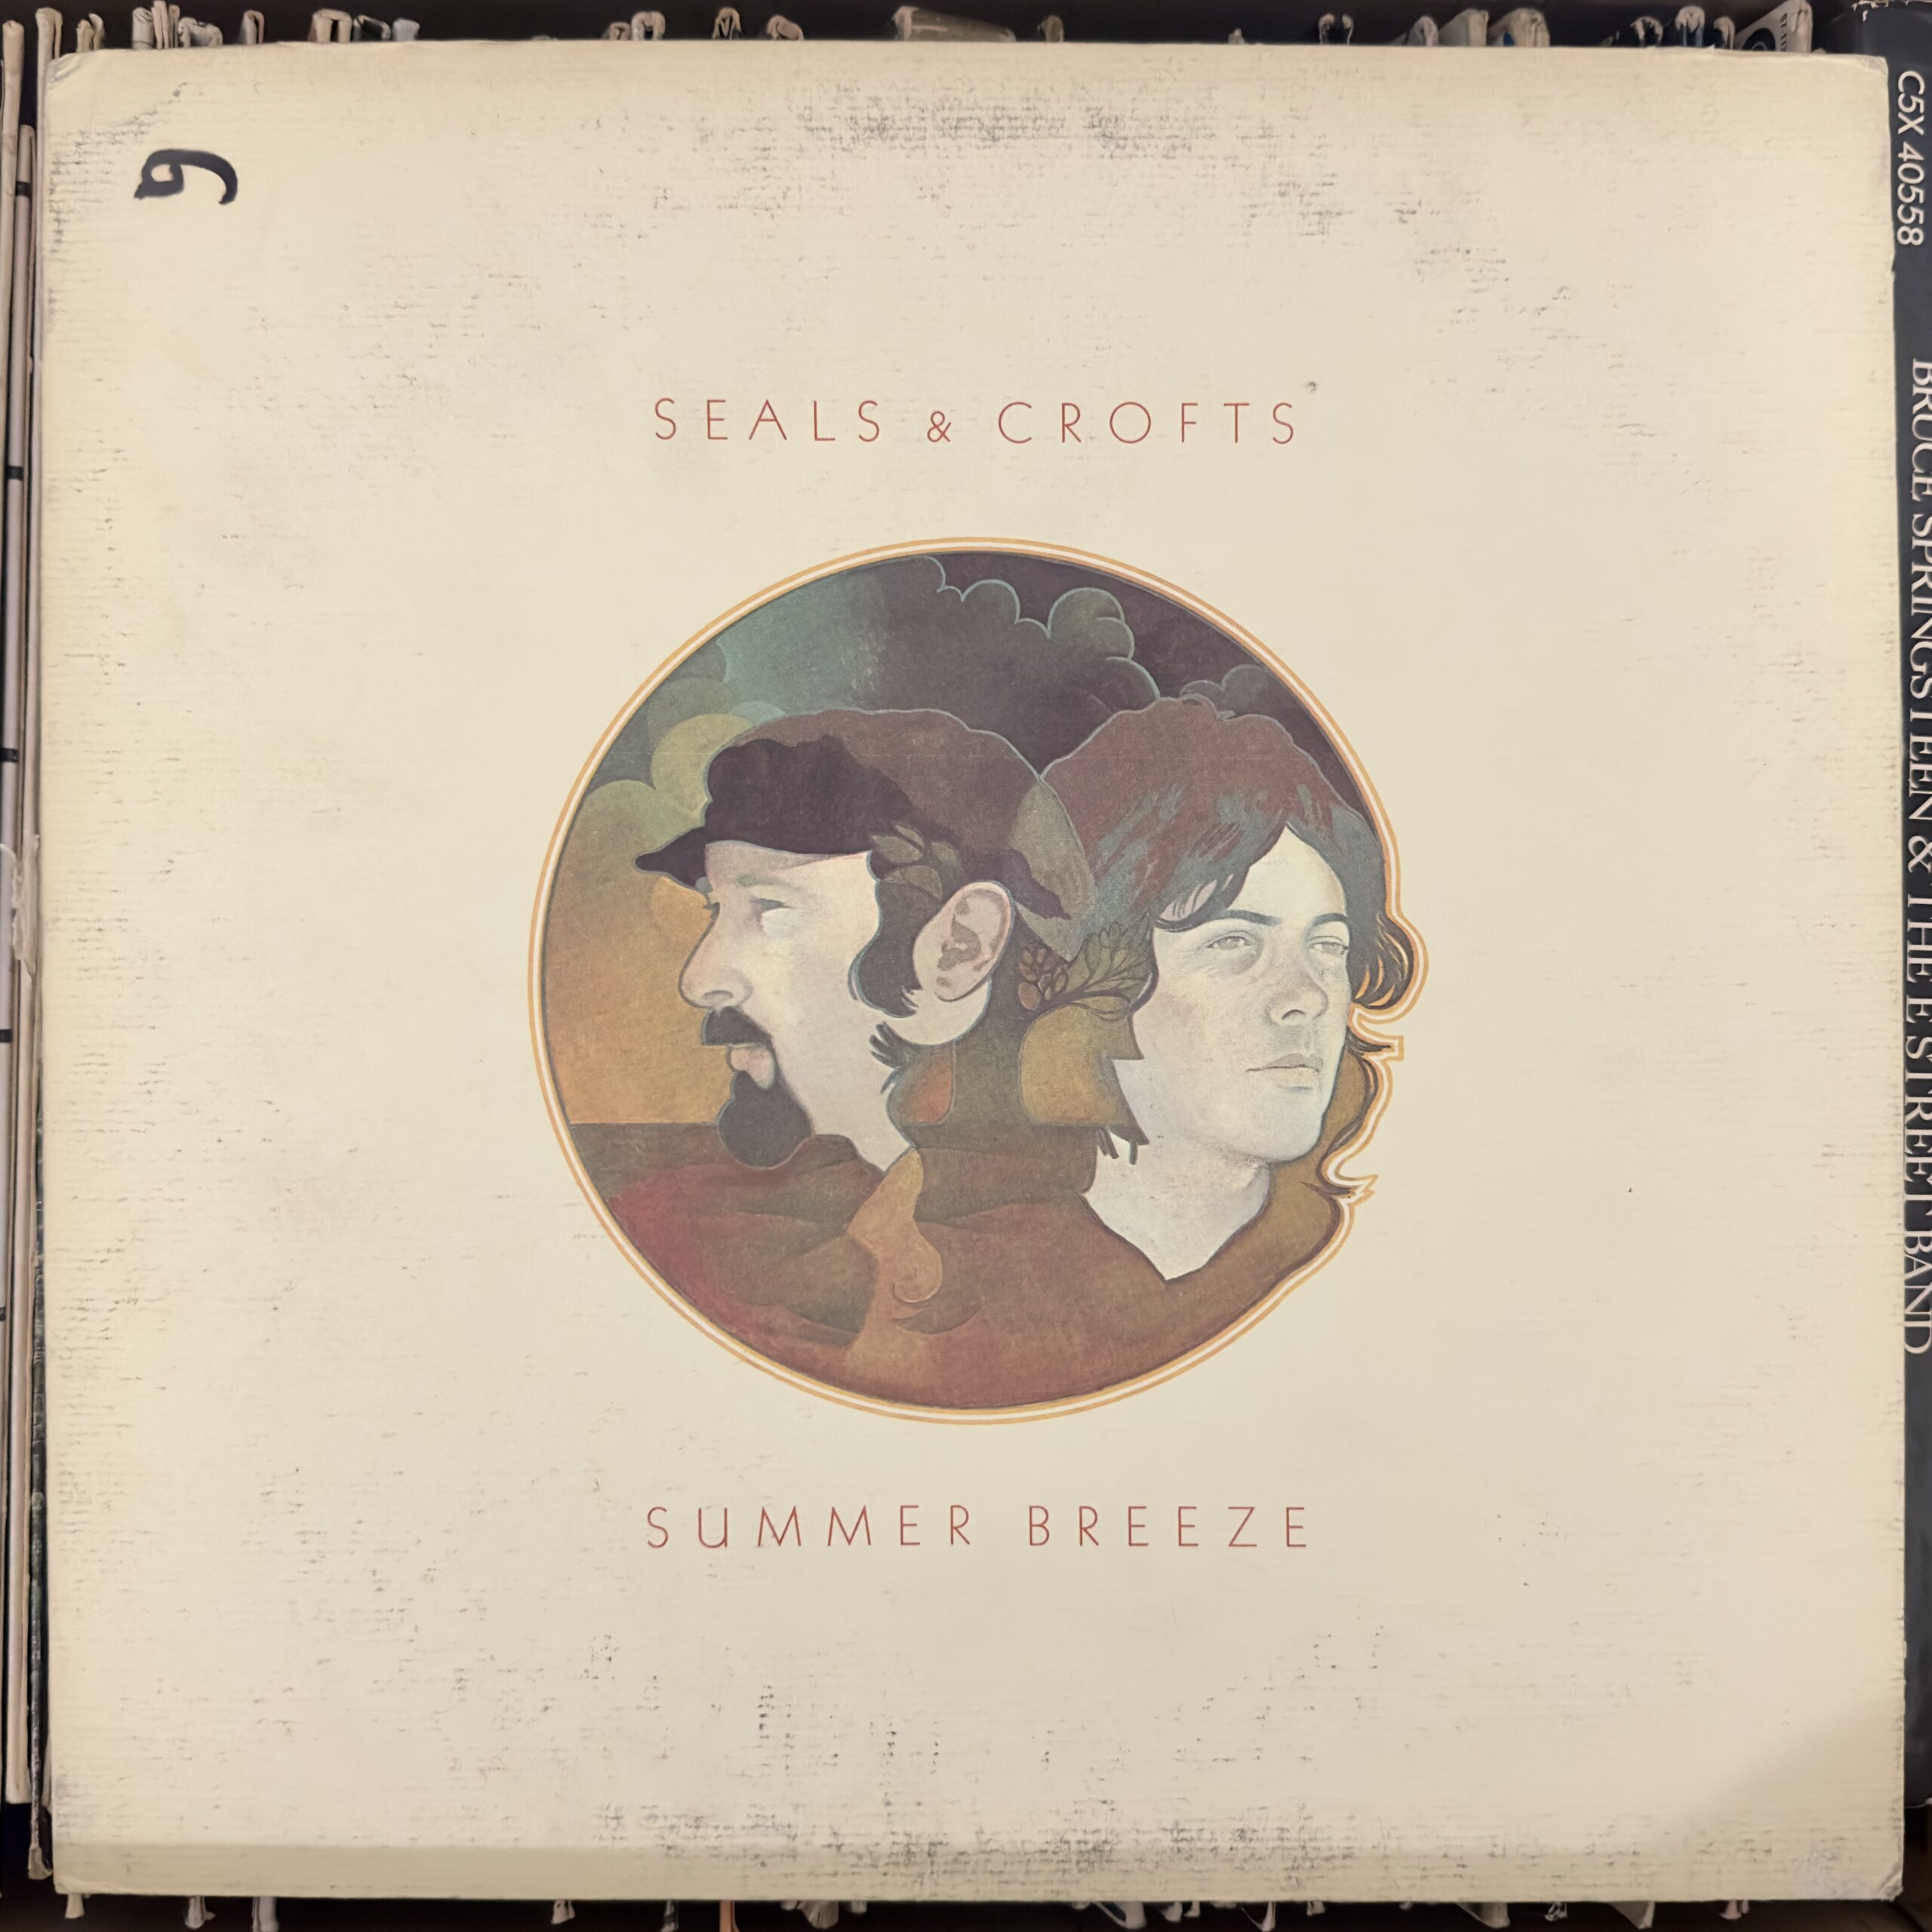 Summer Breeze by Seals and Crofts